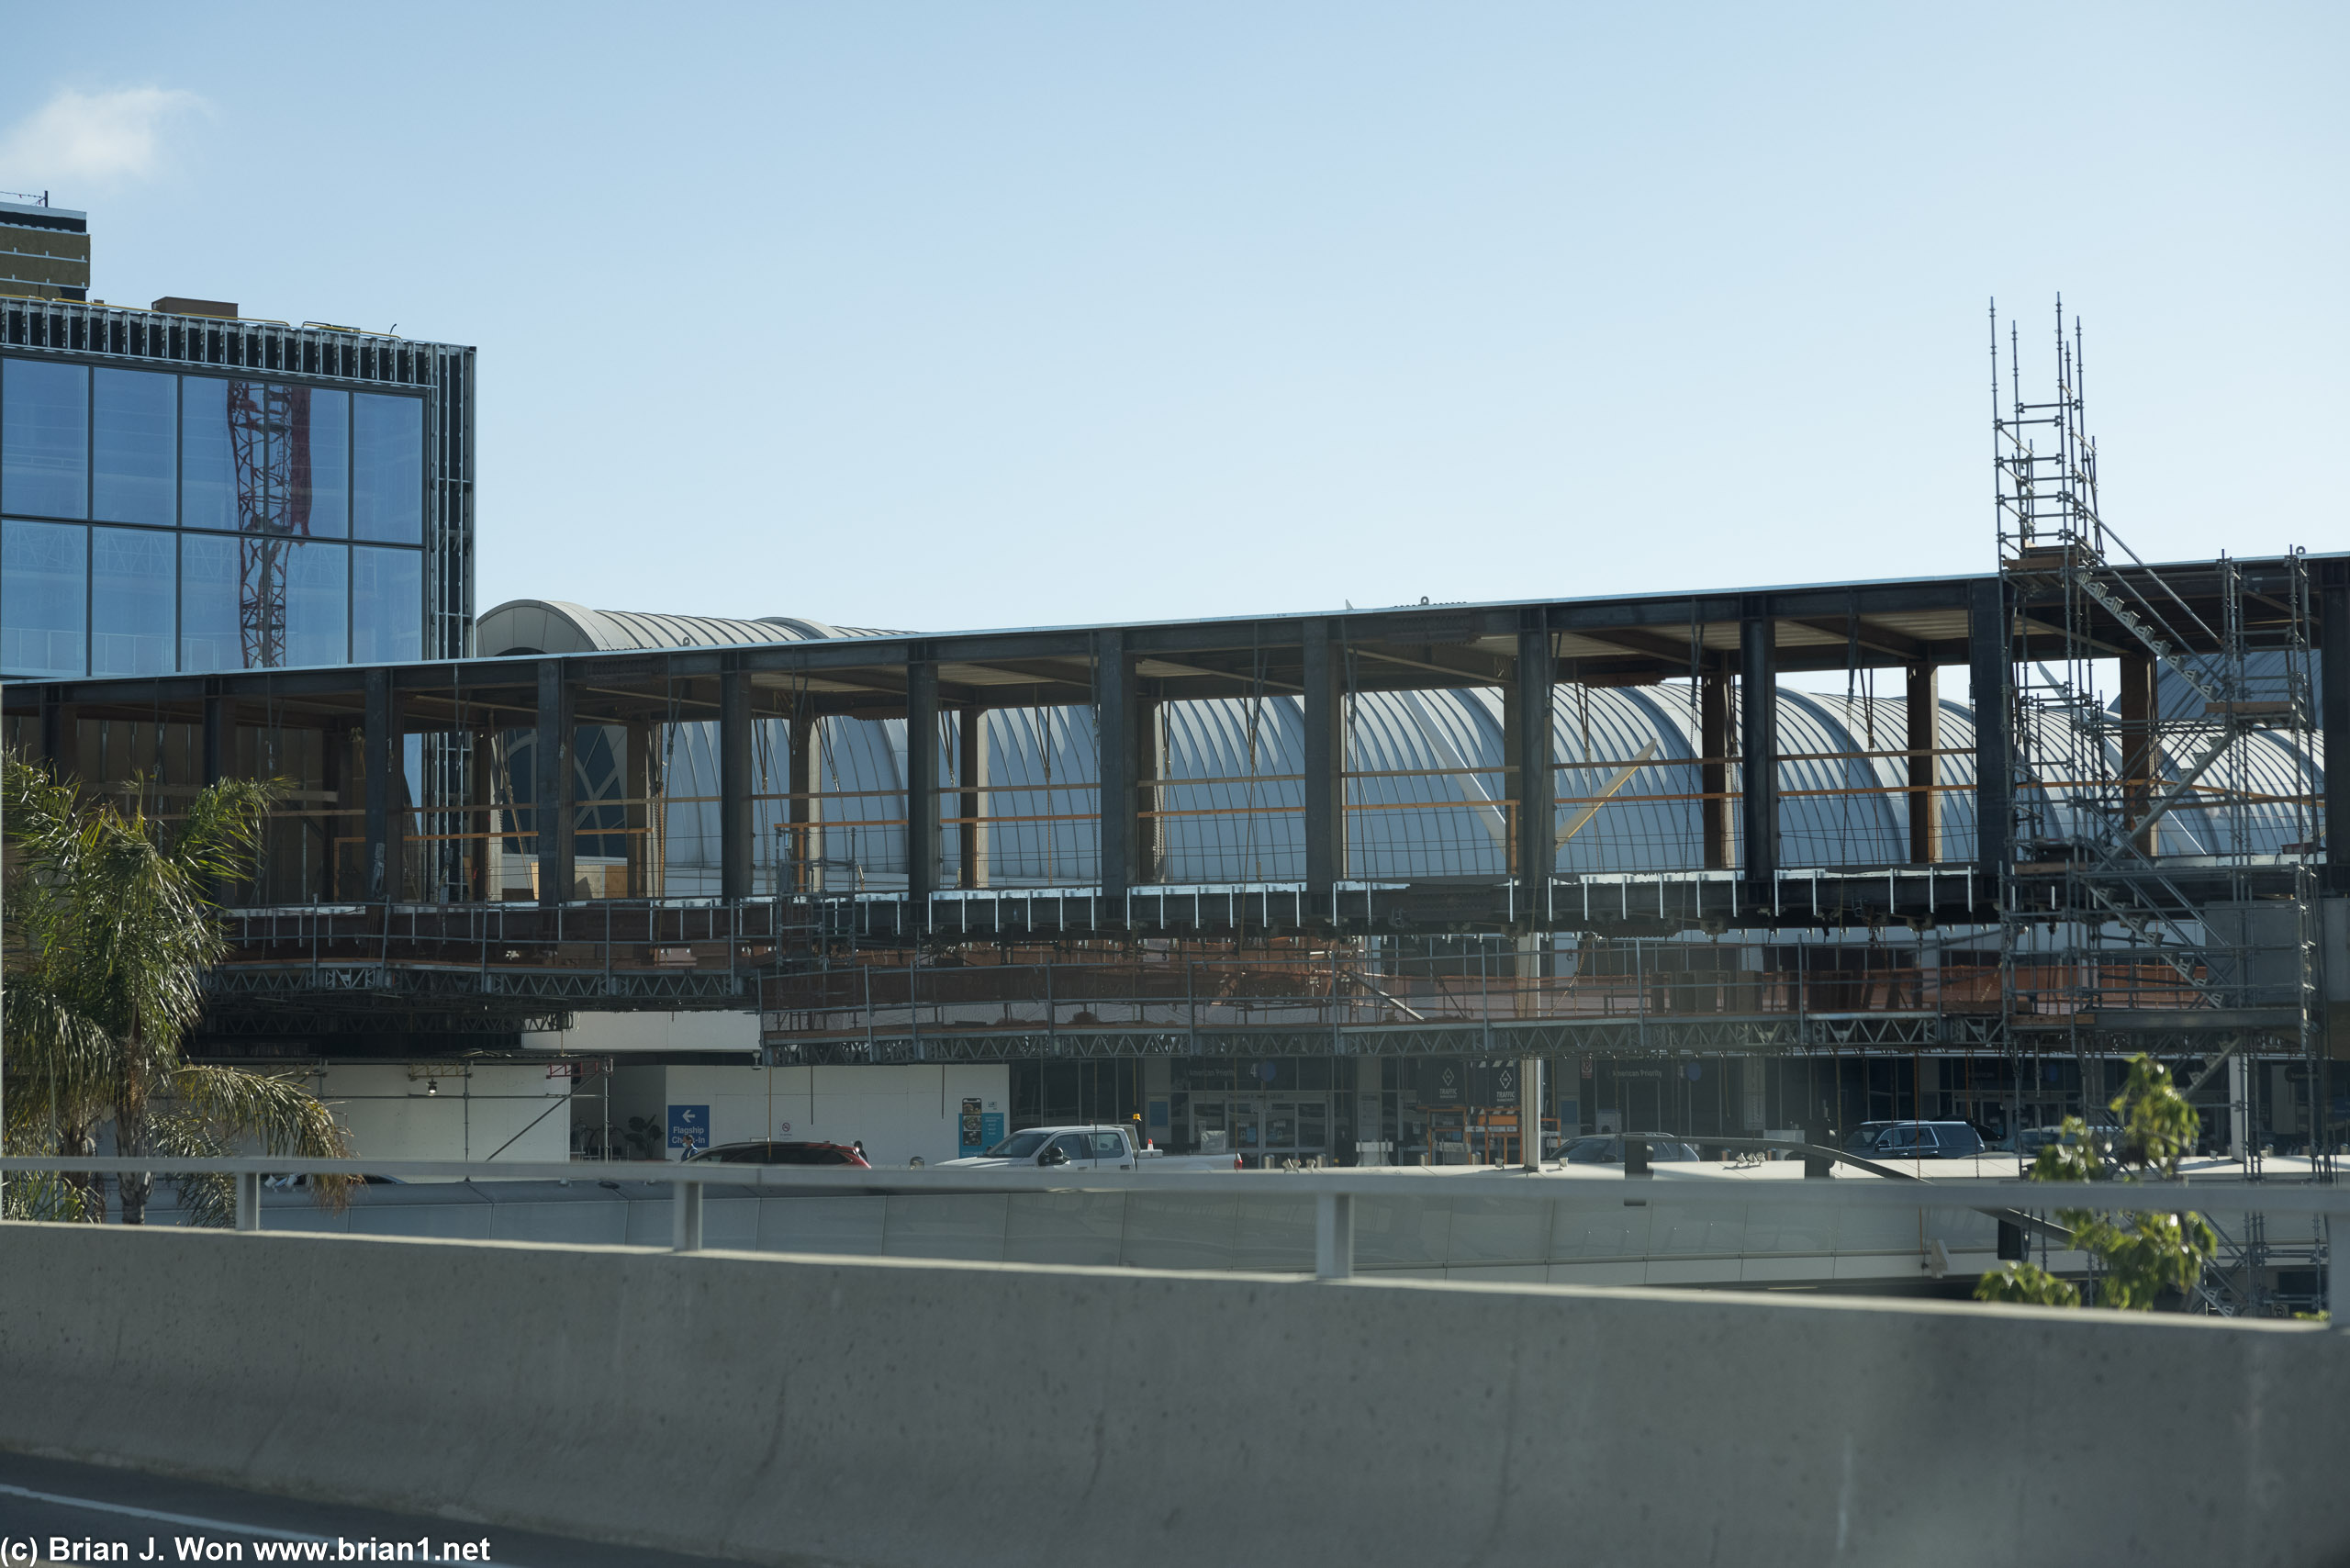 Automated People Mover construction at LAX.